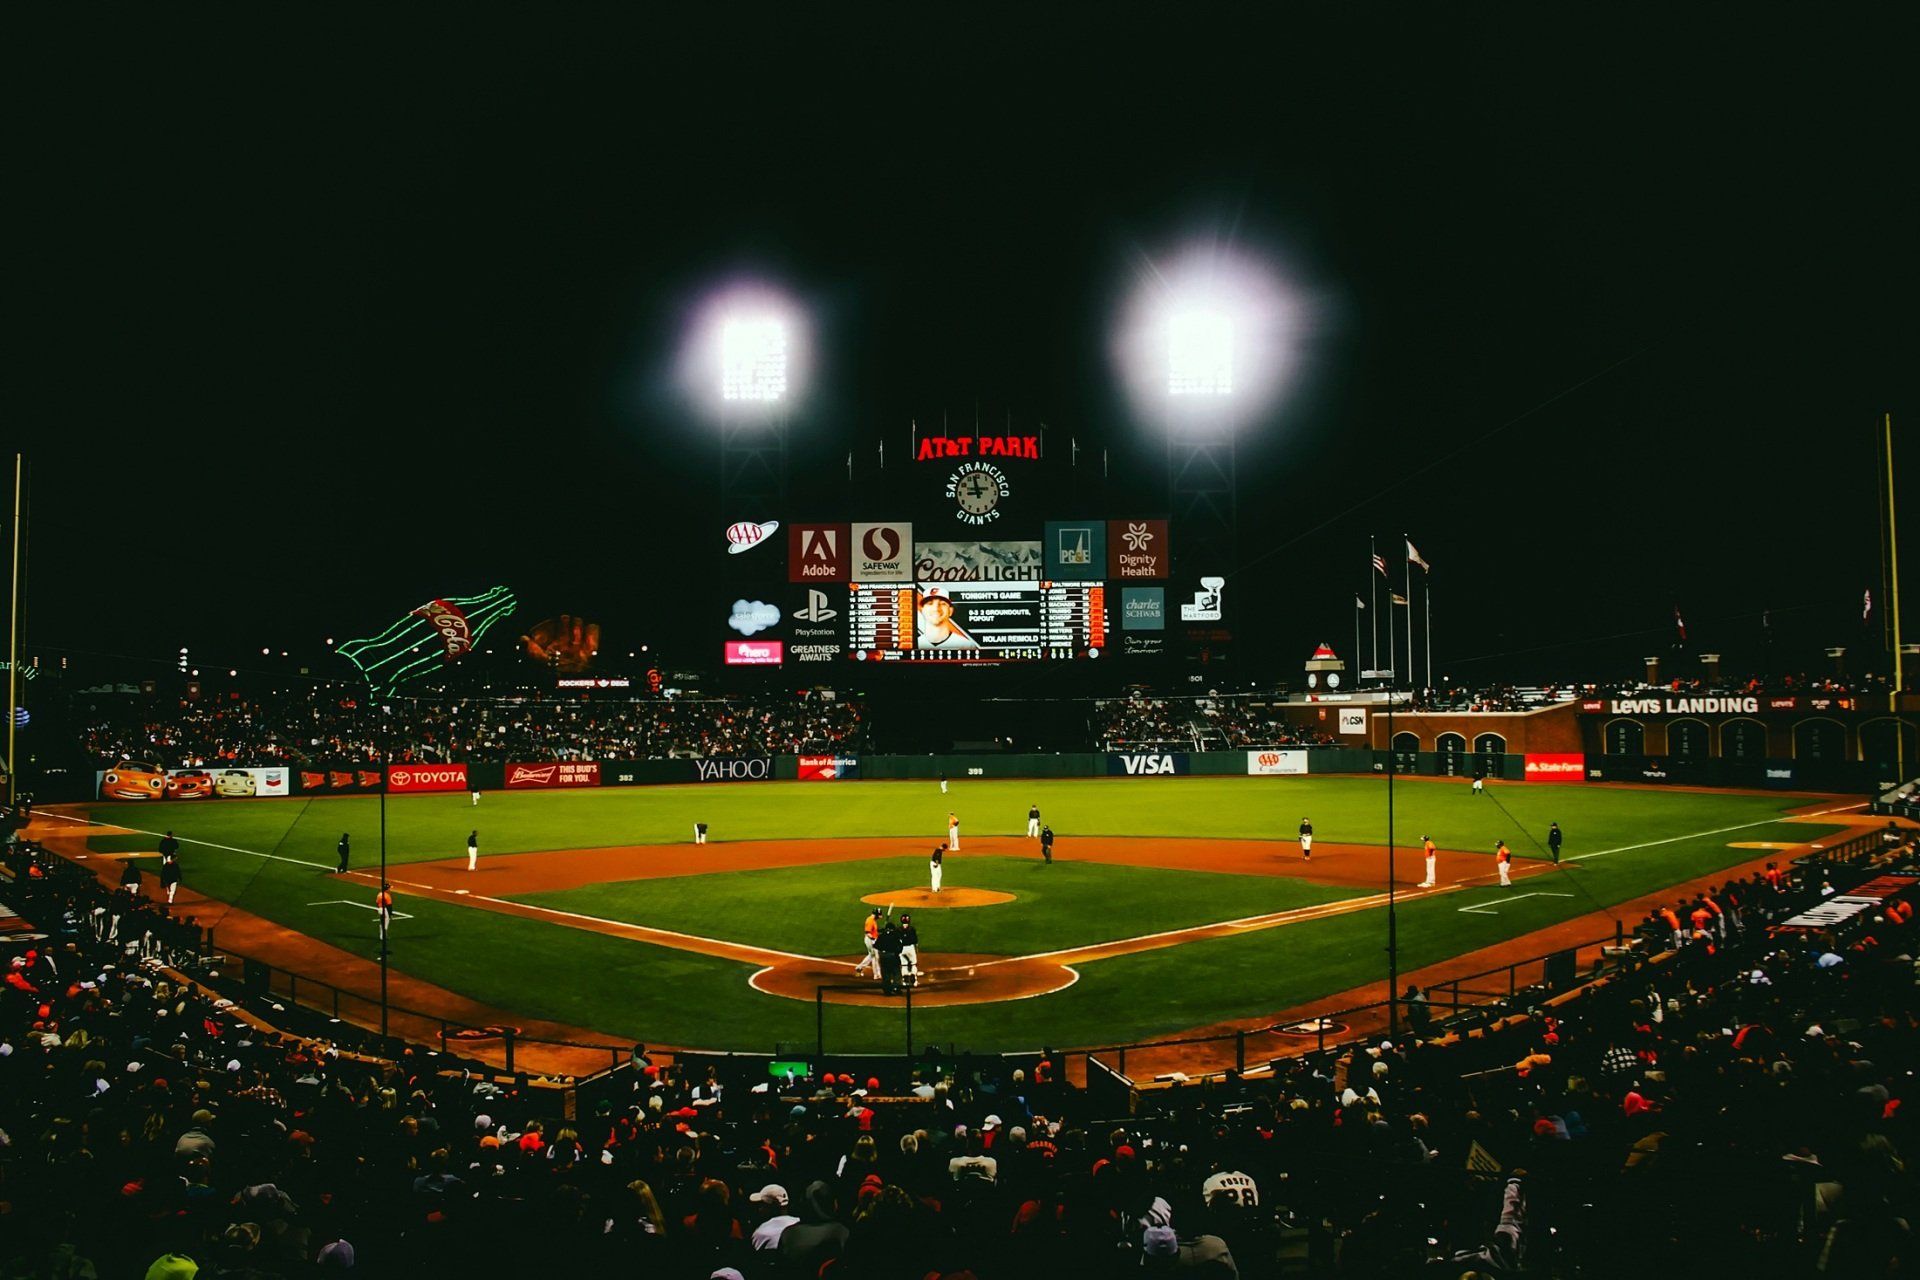 A baseball game is being played in a stadium at night